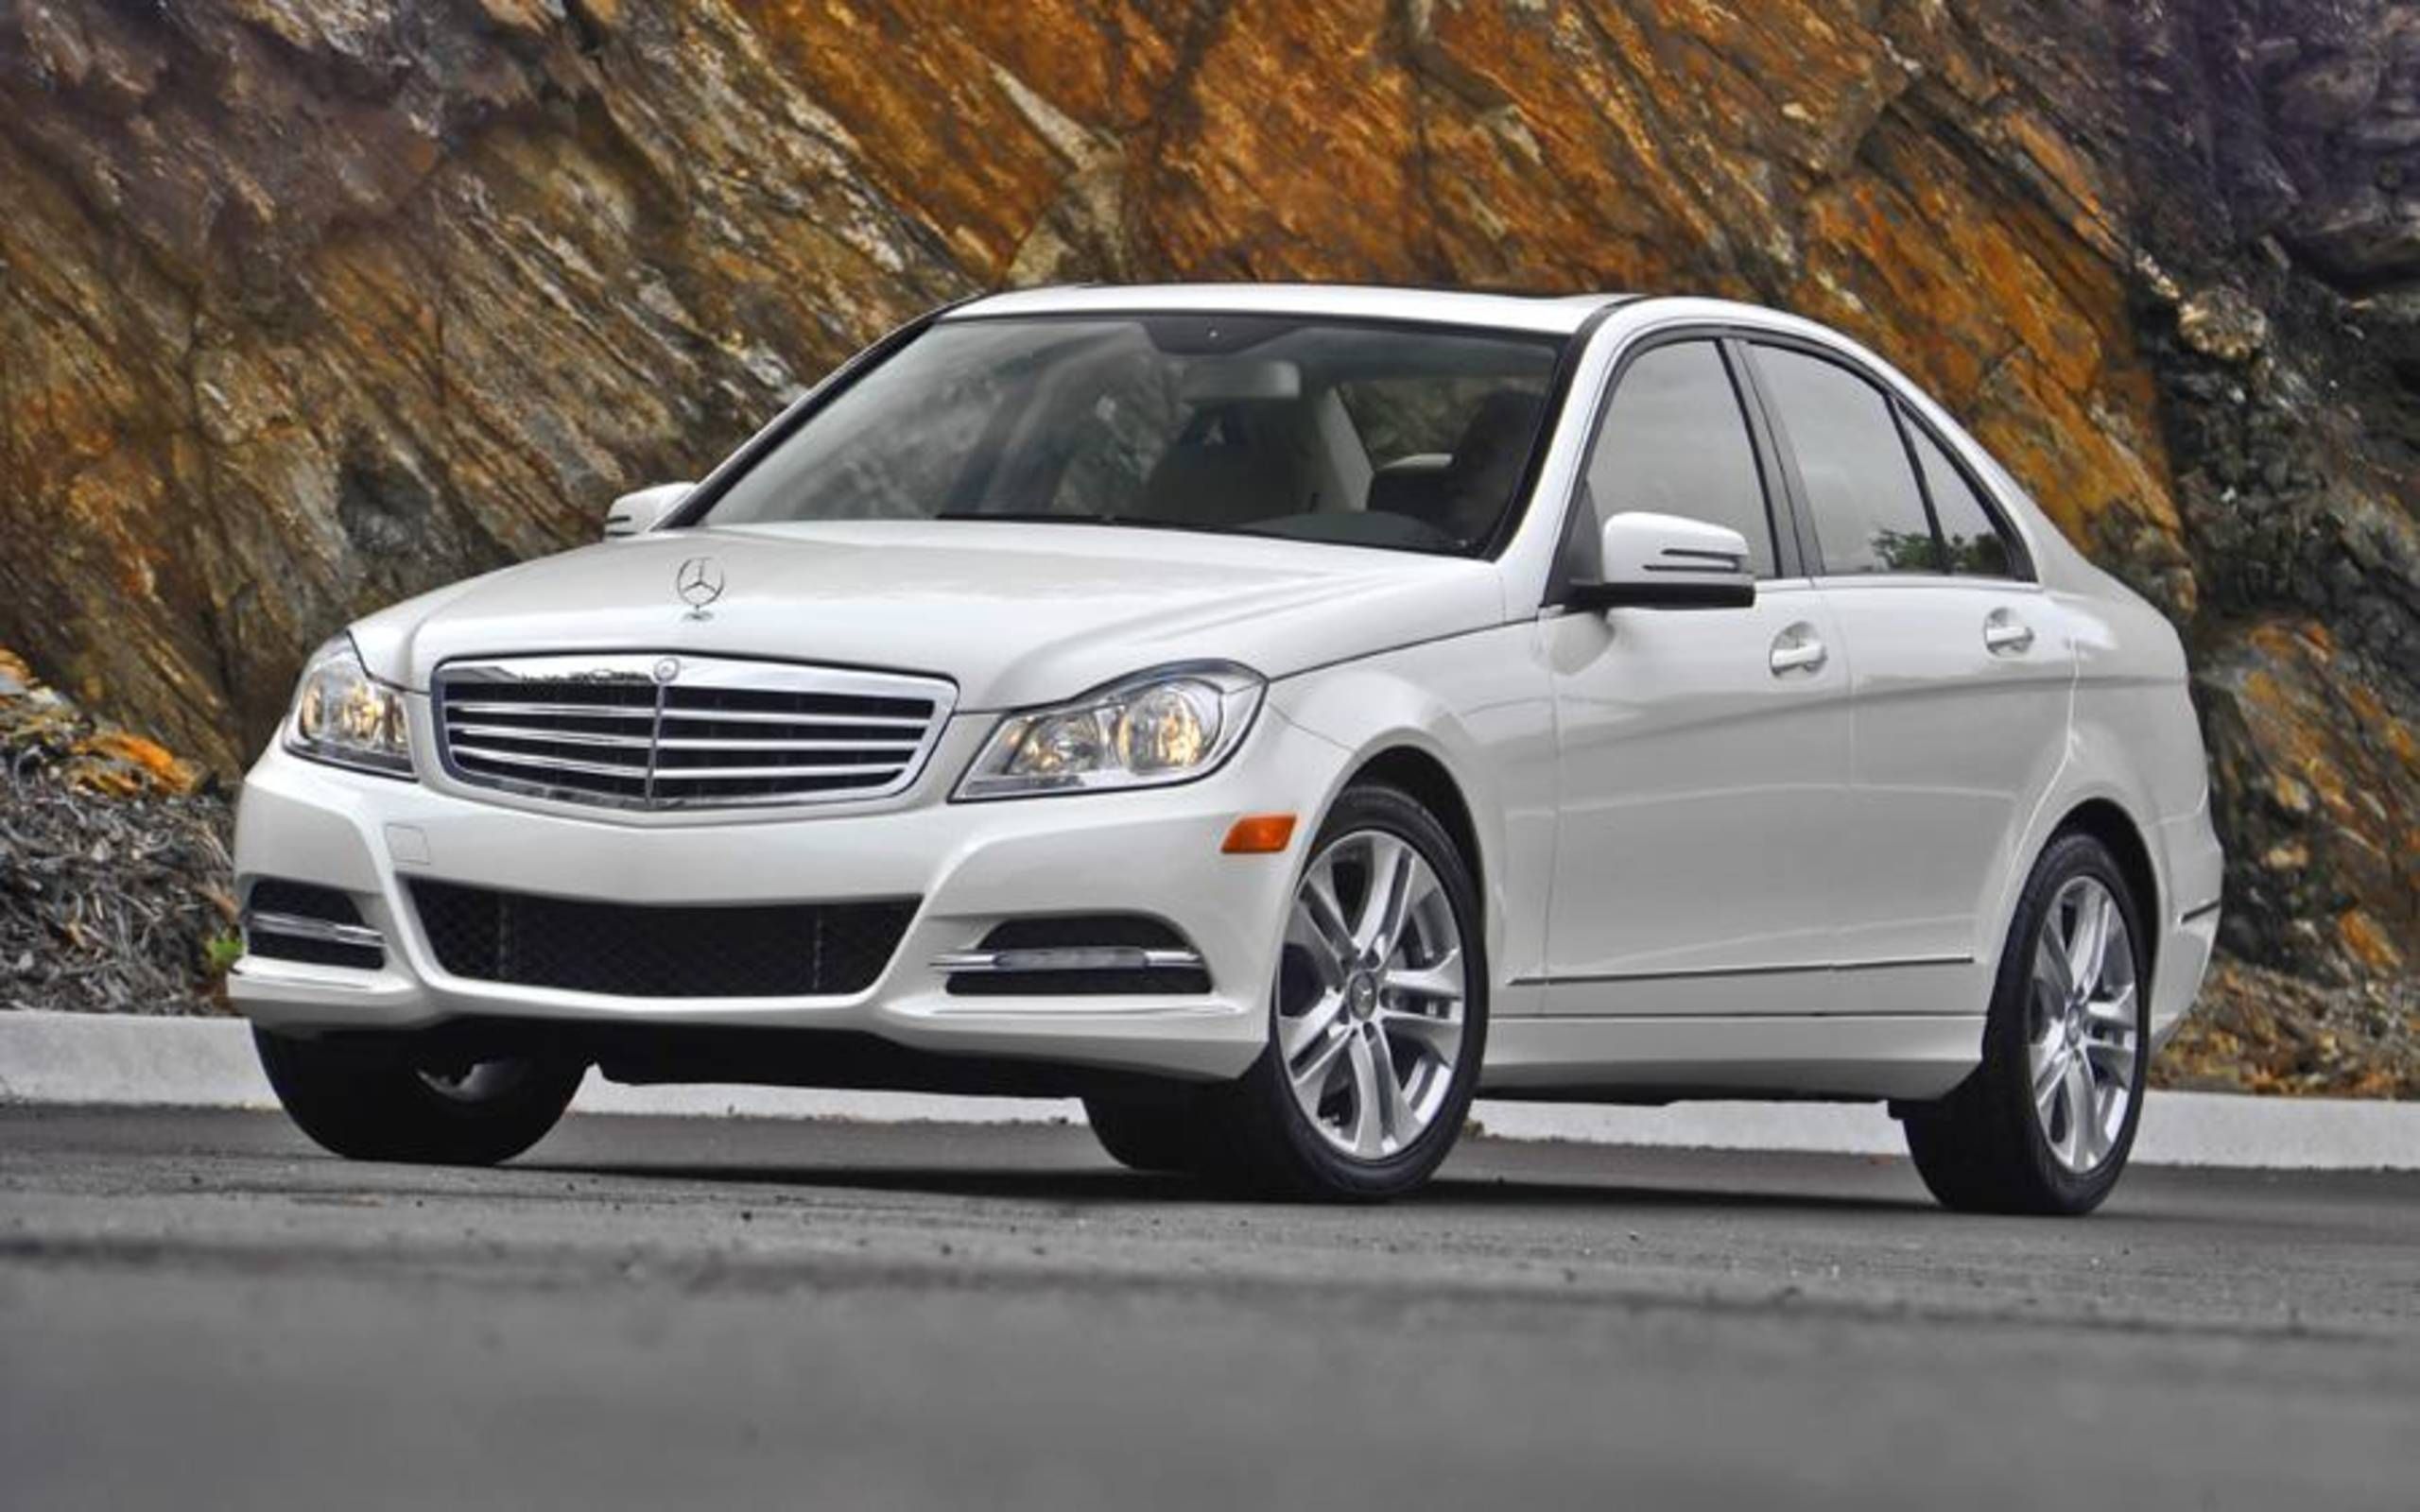 2012 Mercedes Benz C300 4matic Luxury Sedan Review Notes A High Value Entry Level Luxury Sedan